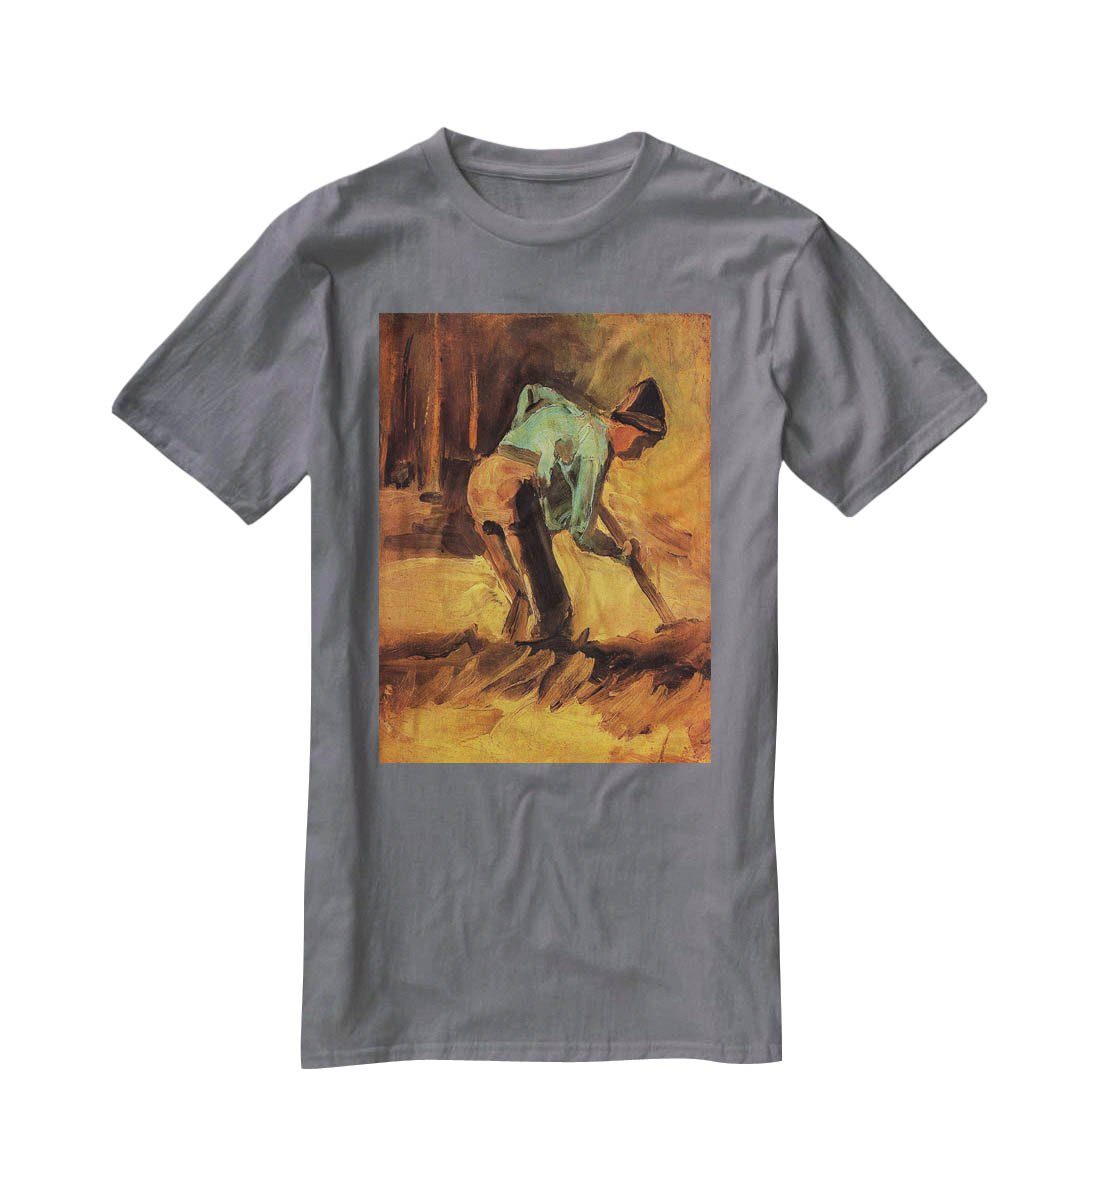 Man Stooping with Stick or Spade by Van Gogh T-Shirt - Canvas Art Rocks - 3